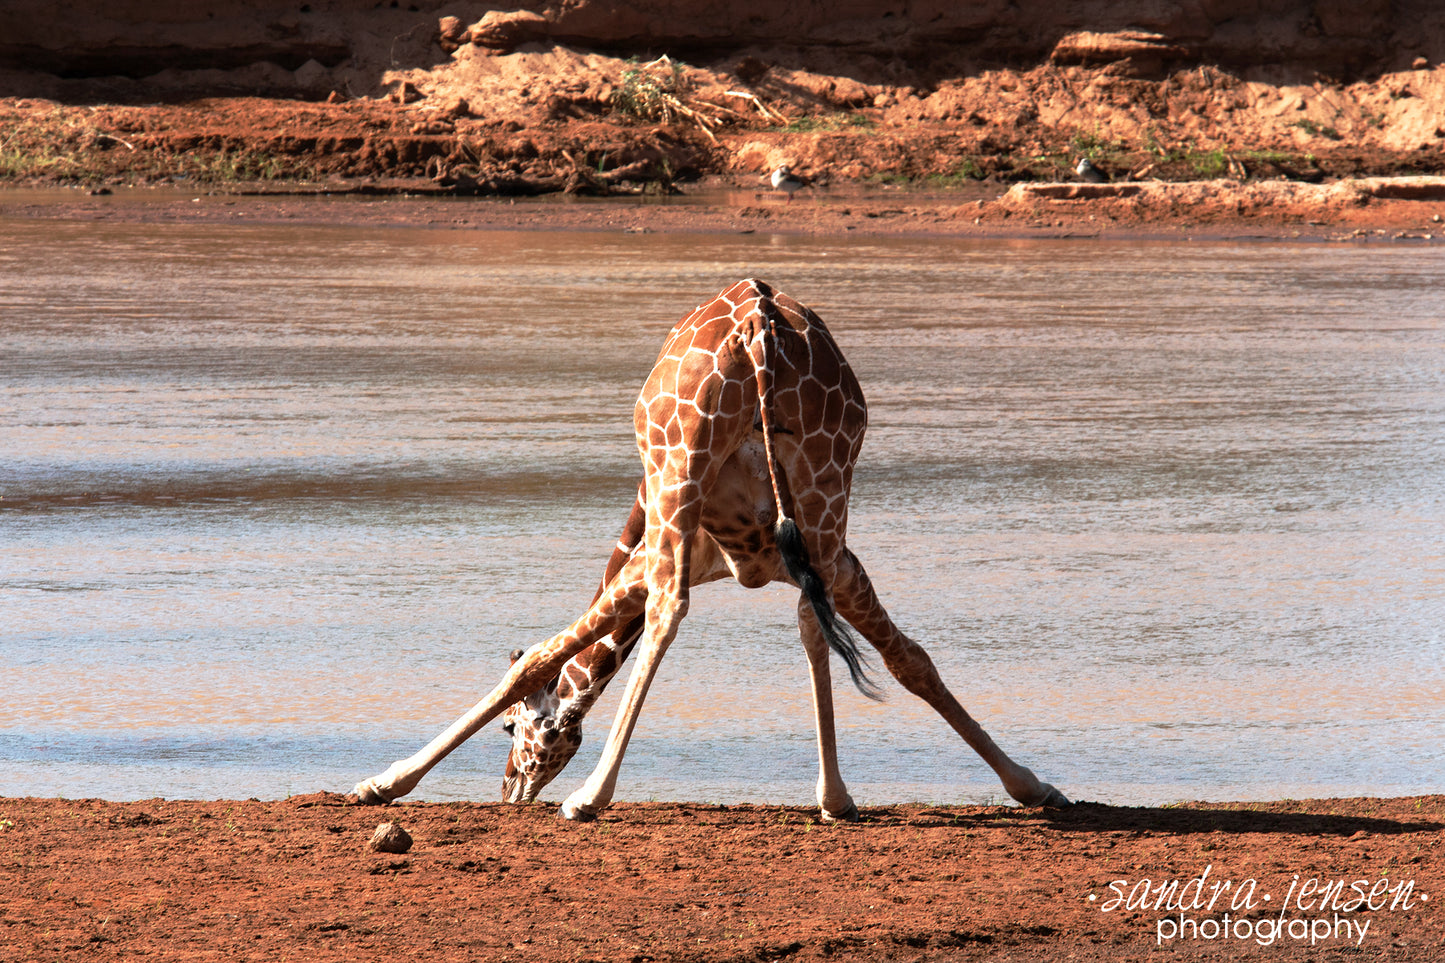 Print - African Giraffe drinking in the River